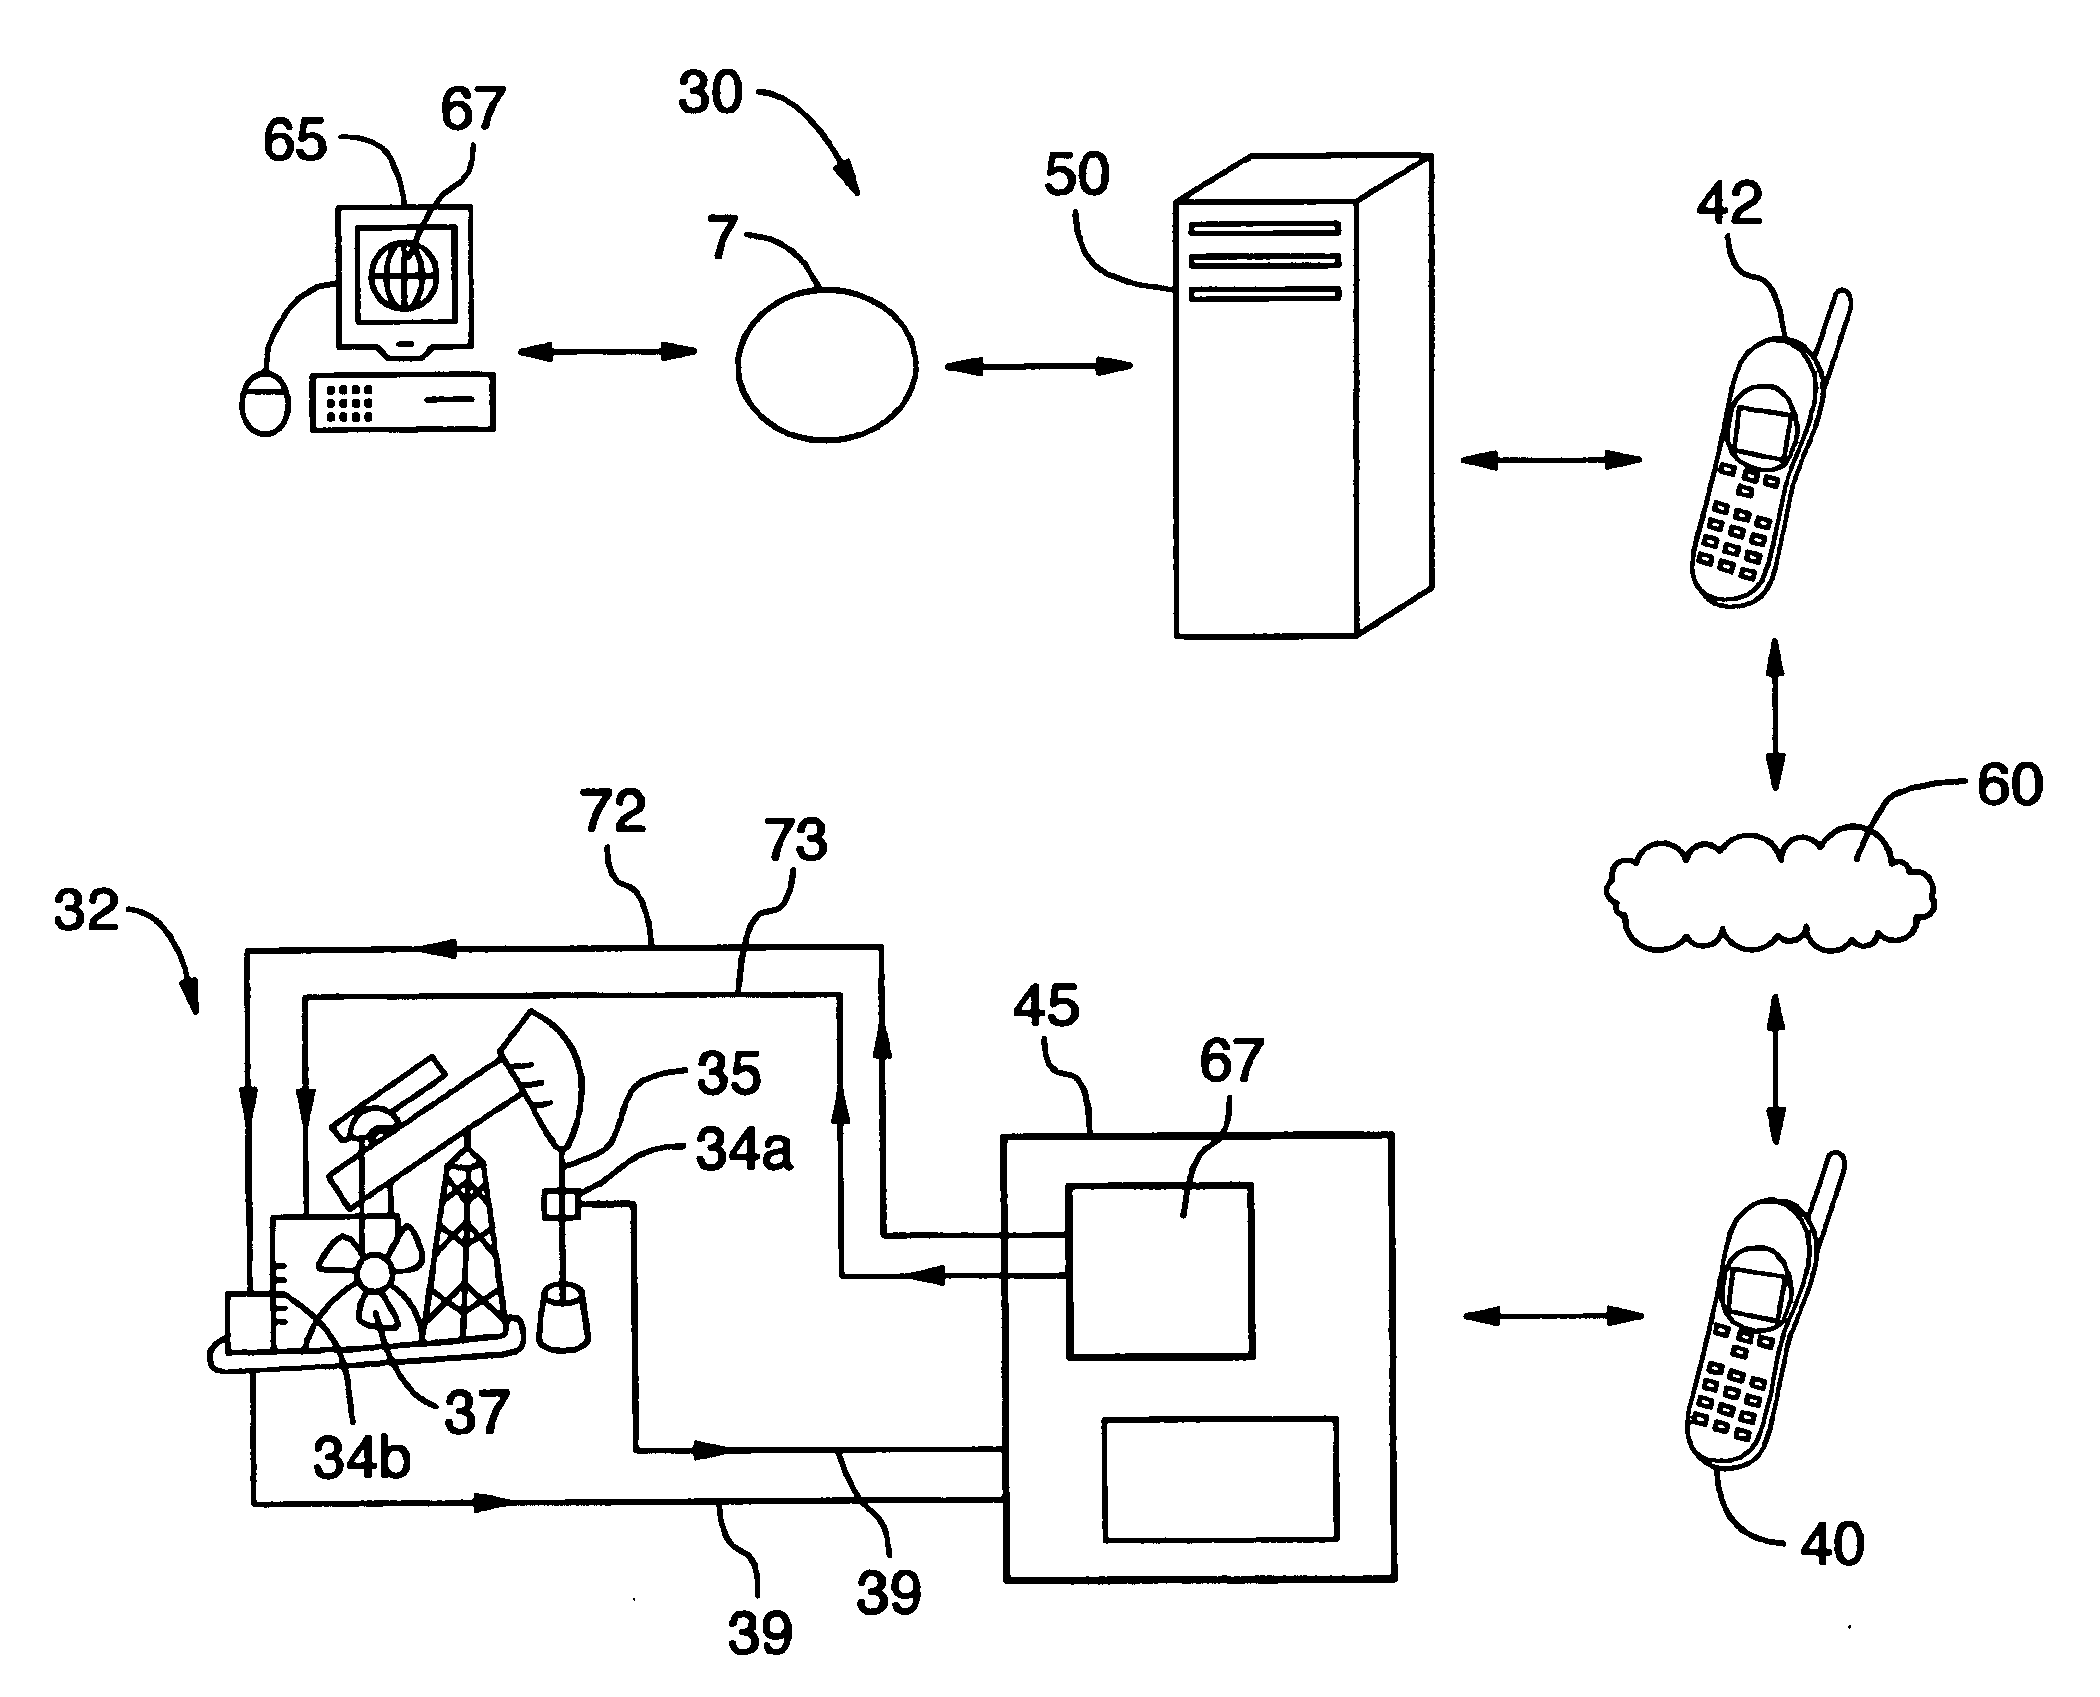 System and method for remotely monitoring and controlling pump jacks